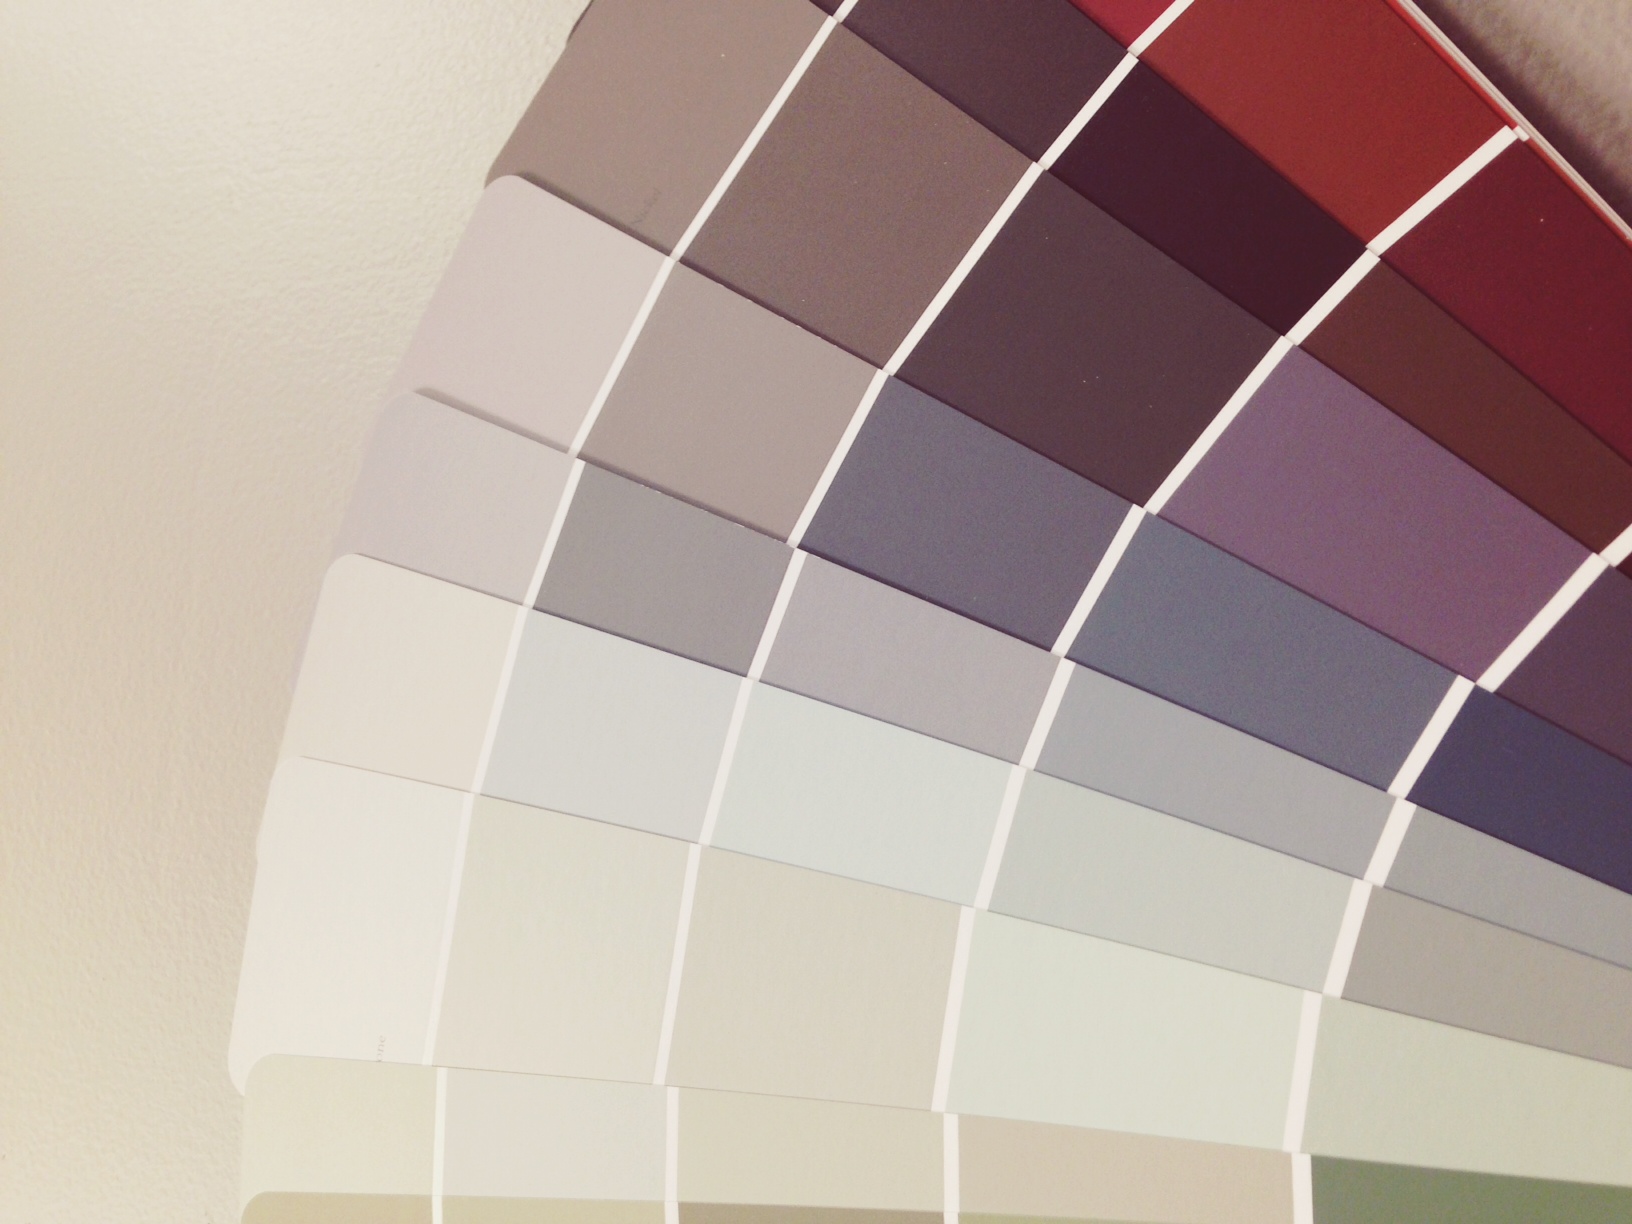 Choosing the right paint colours